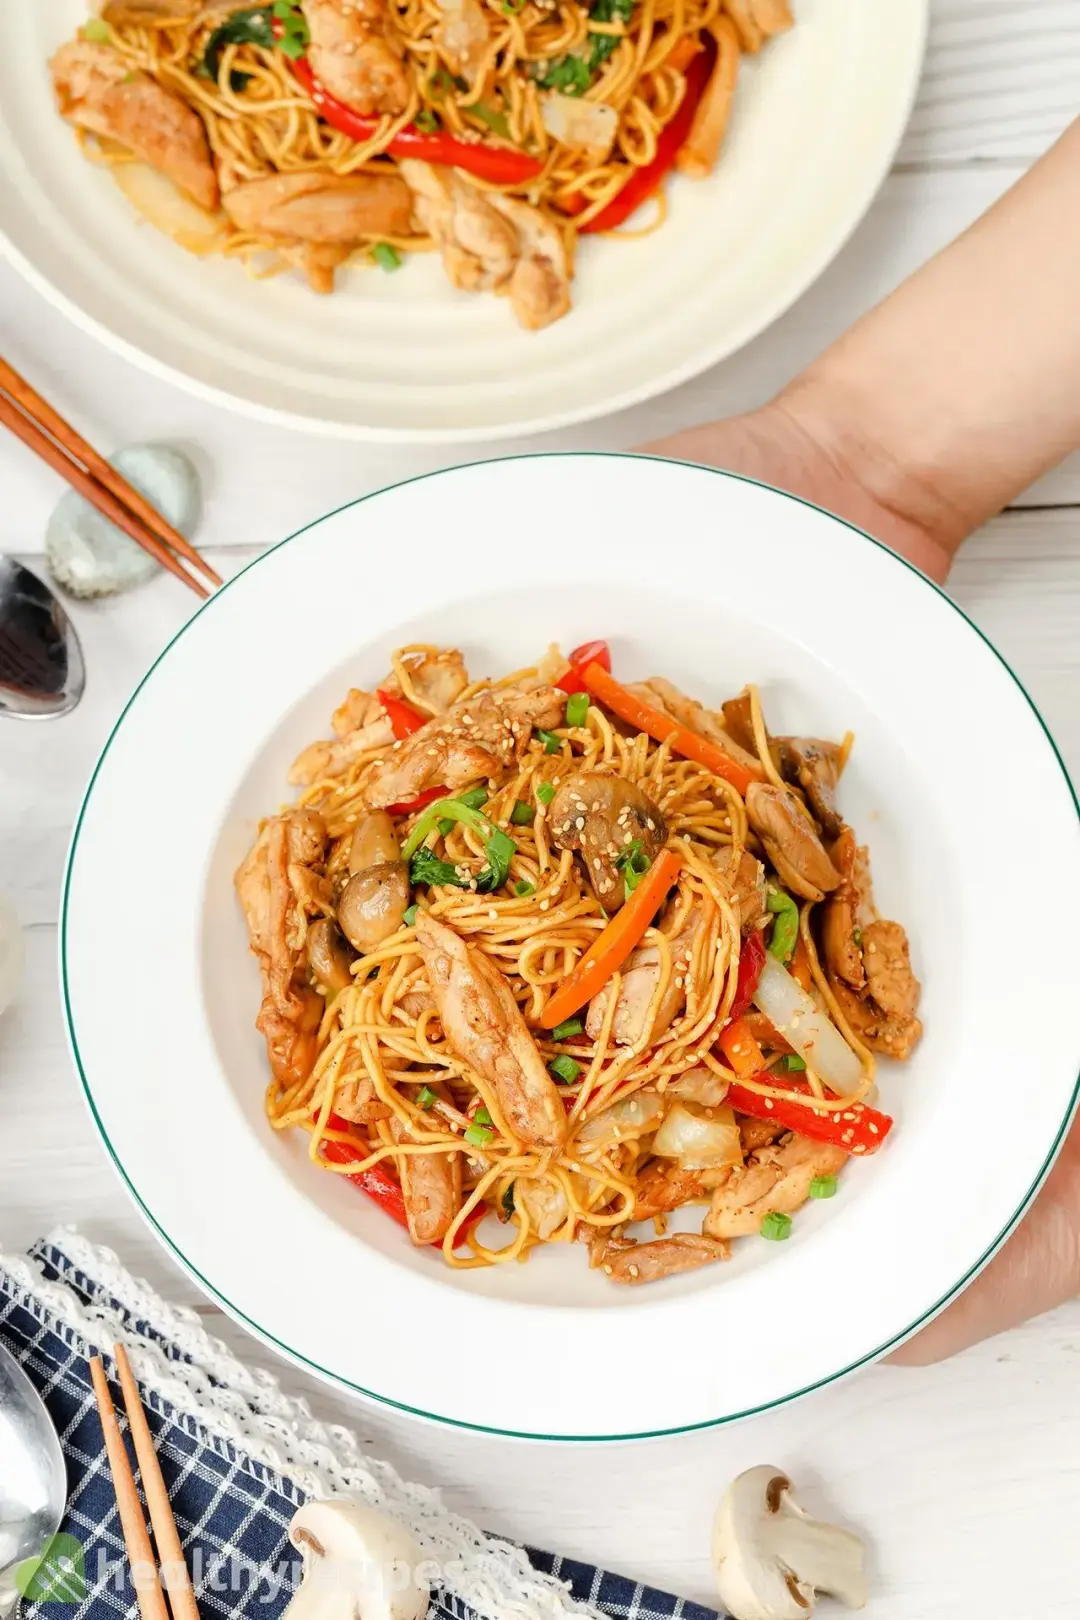 What to Serve With Chicken Chow Mein